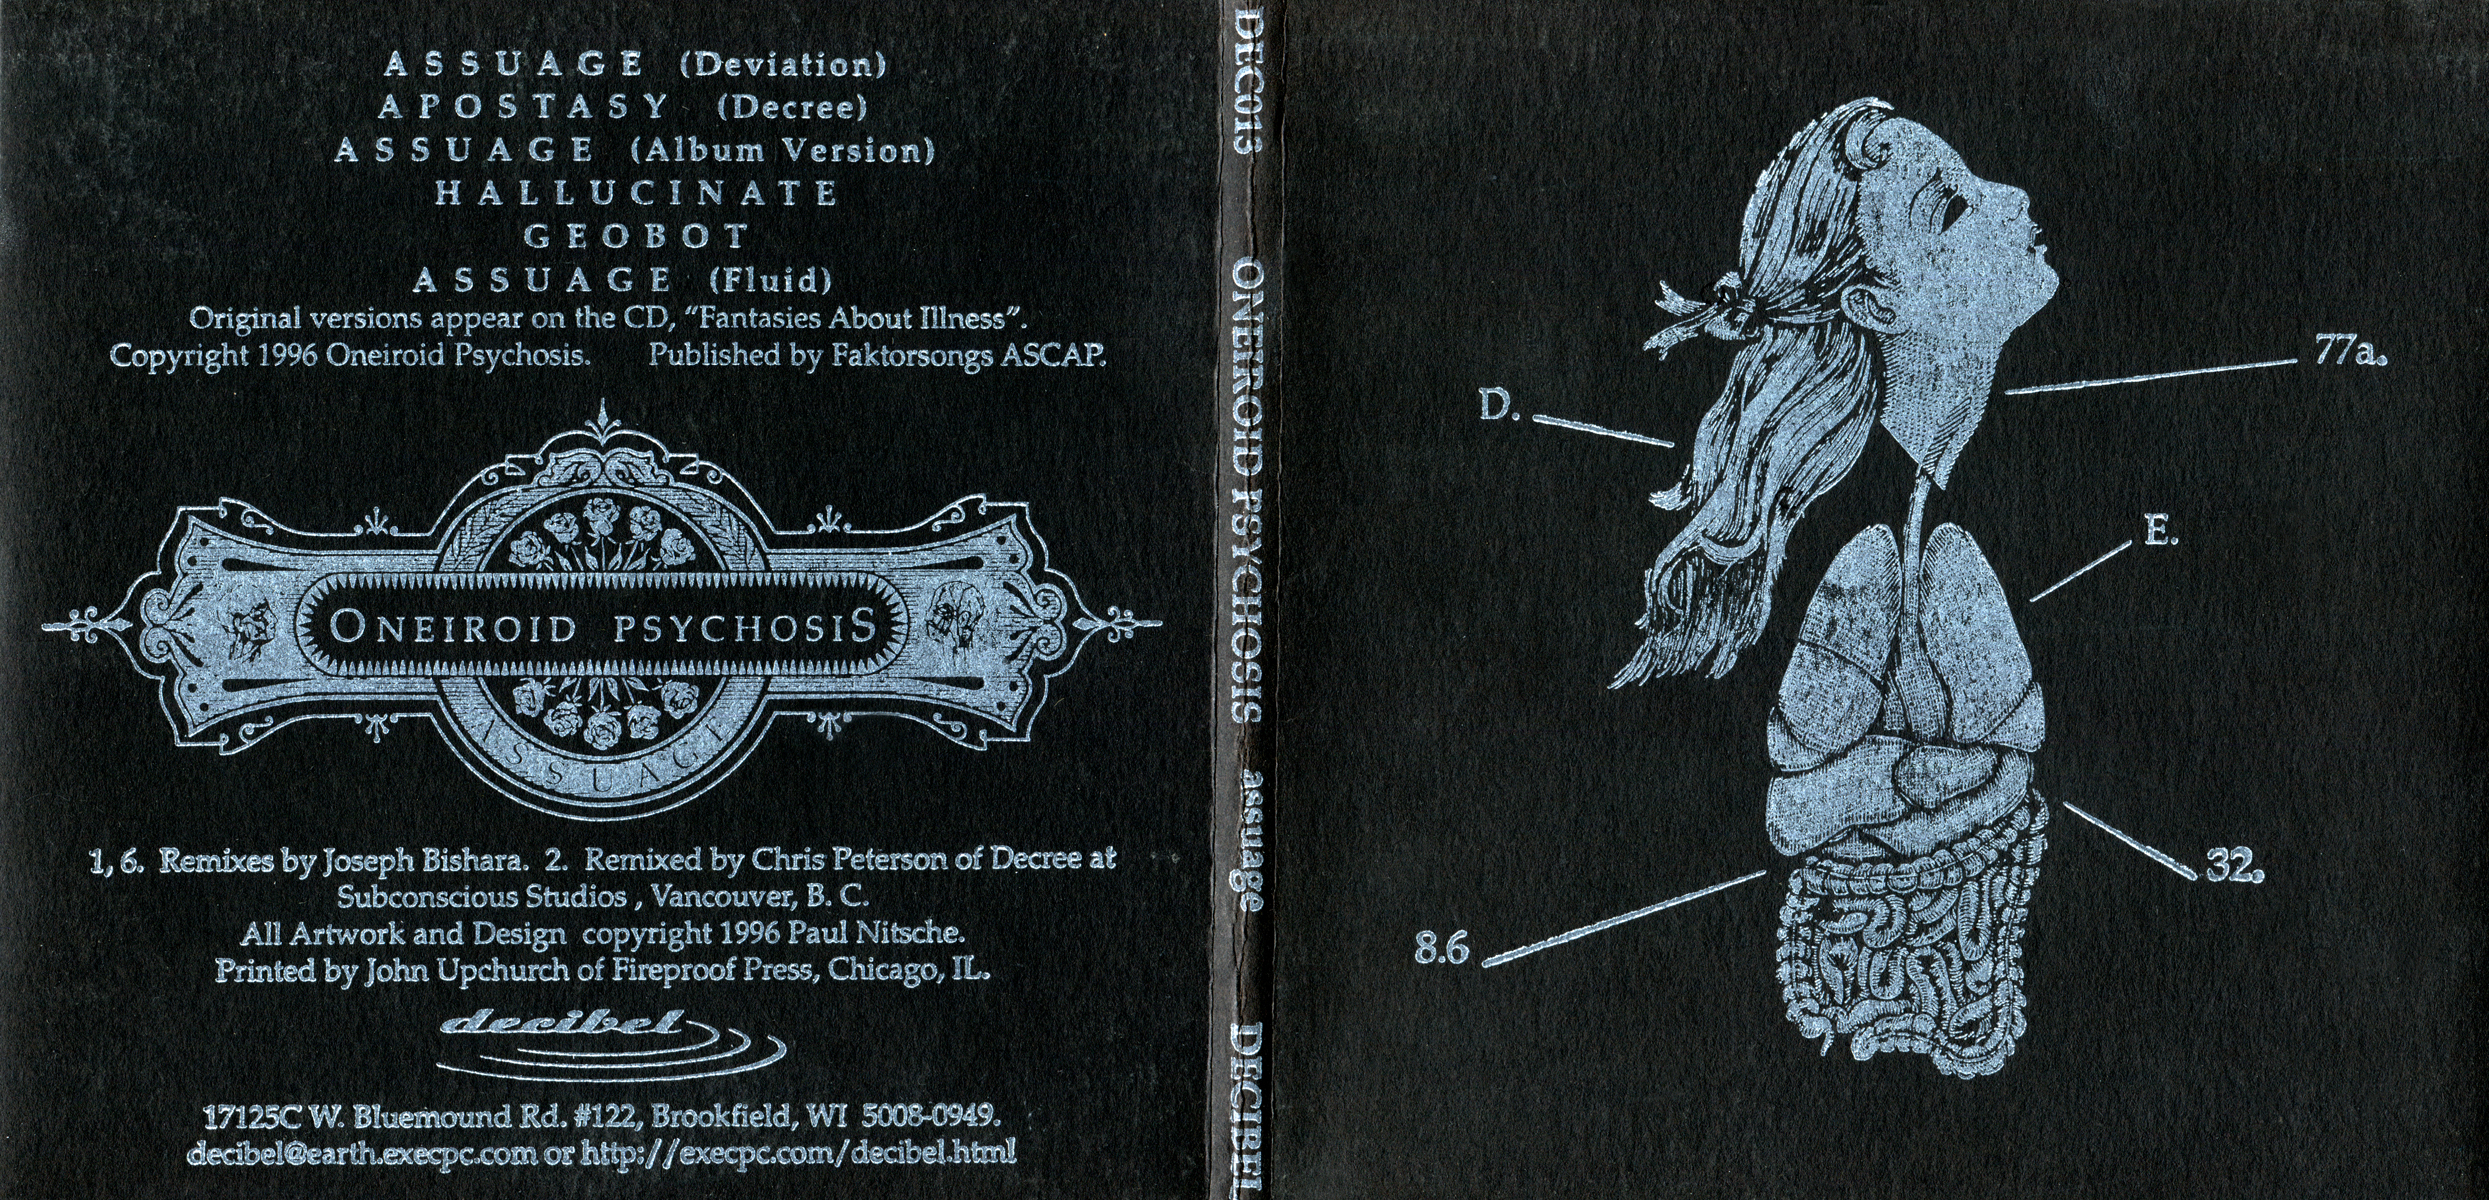   Oneiroid Psychosis,  Assuage.  Front and back covers.  1996. Pen and ink, Scratch board. Letterpress printed. Released by Decibel Records. 